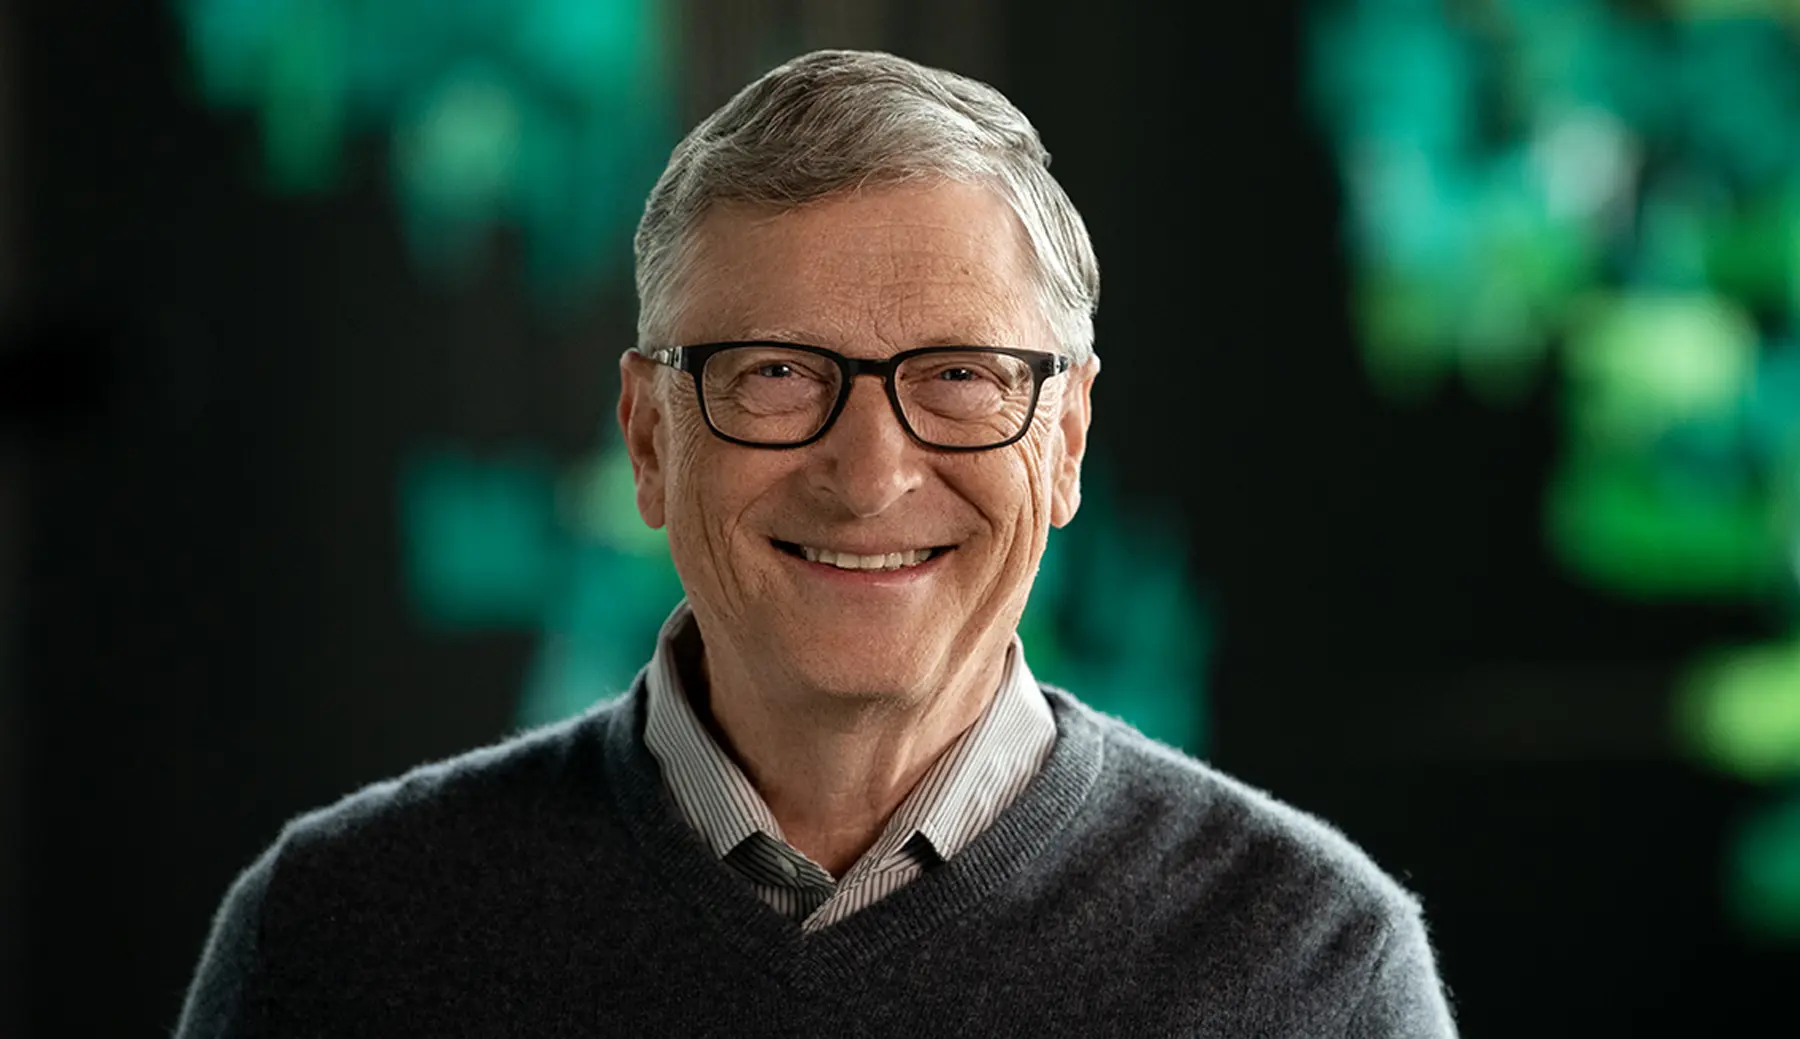 Bill Gates, a big name in technology, shares the ‘best age’ for kids to start using smartphones.